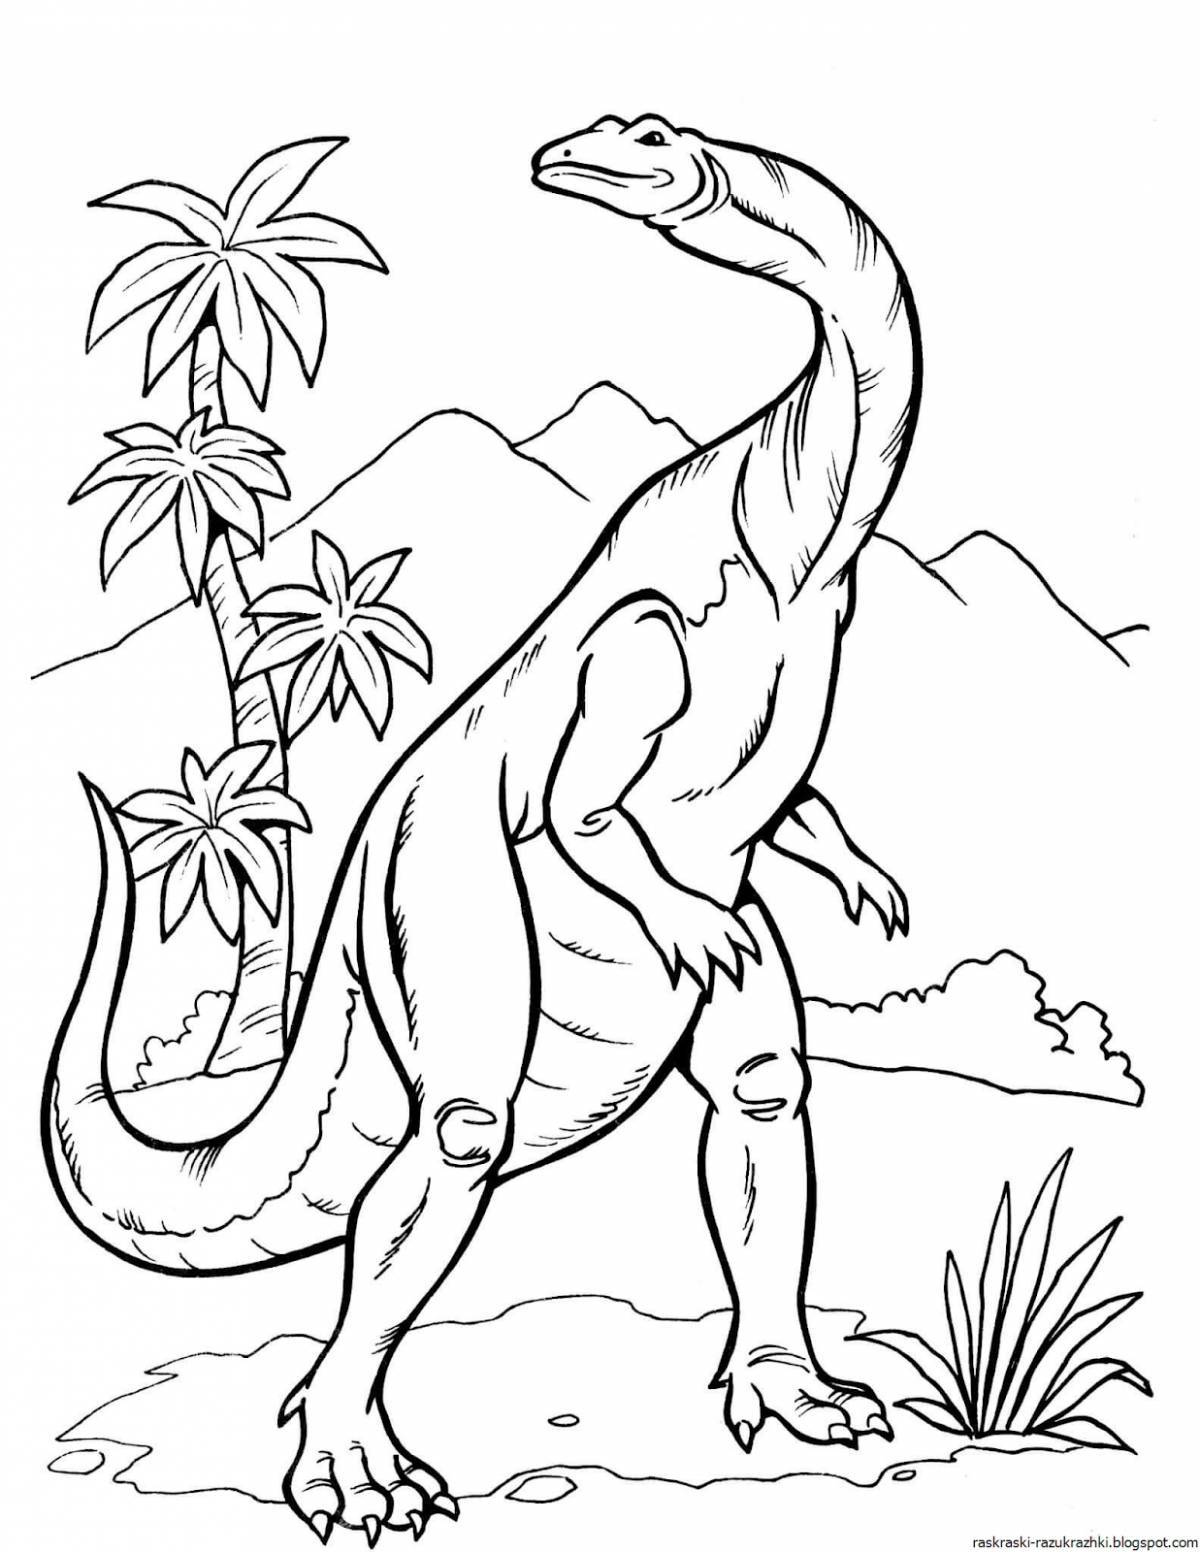 Fabulous dinosaurs coloring for children 5-6 years old